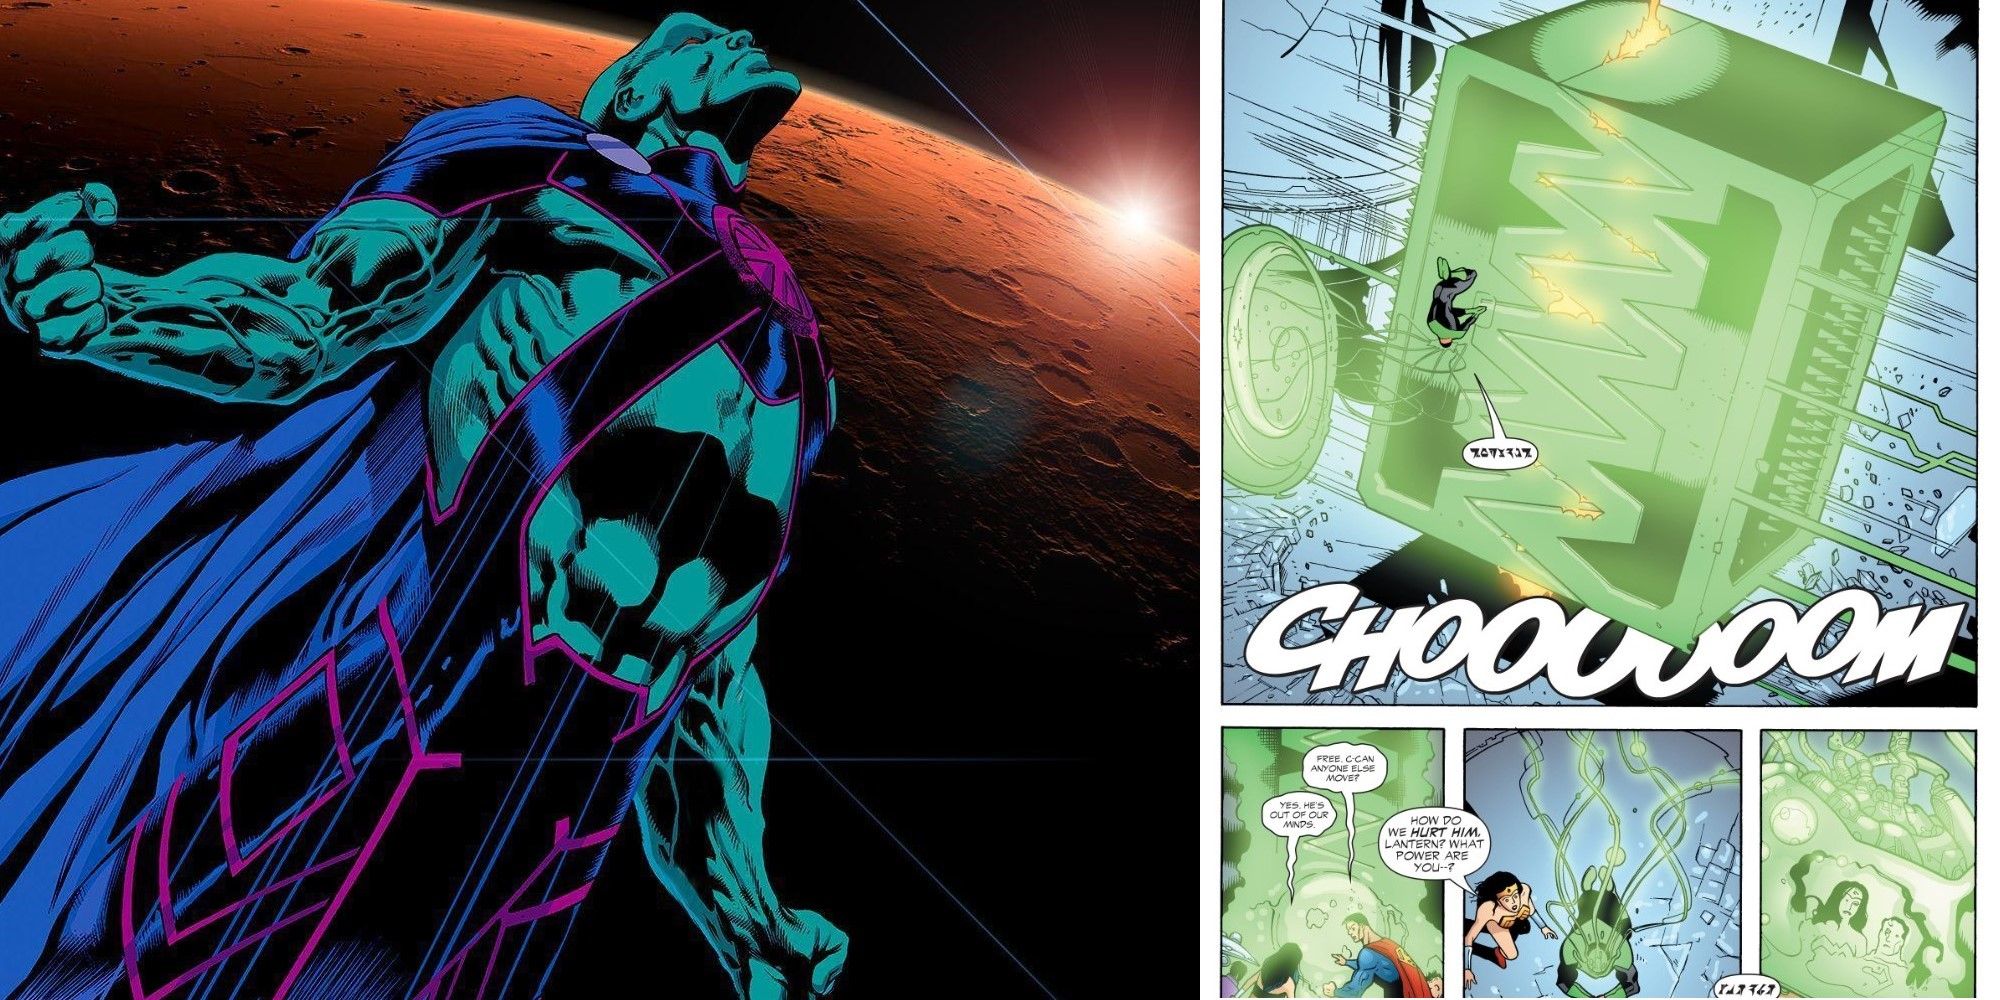 Green Lantern creates a cage that Martian Manhunter cannot escape from